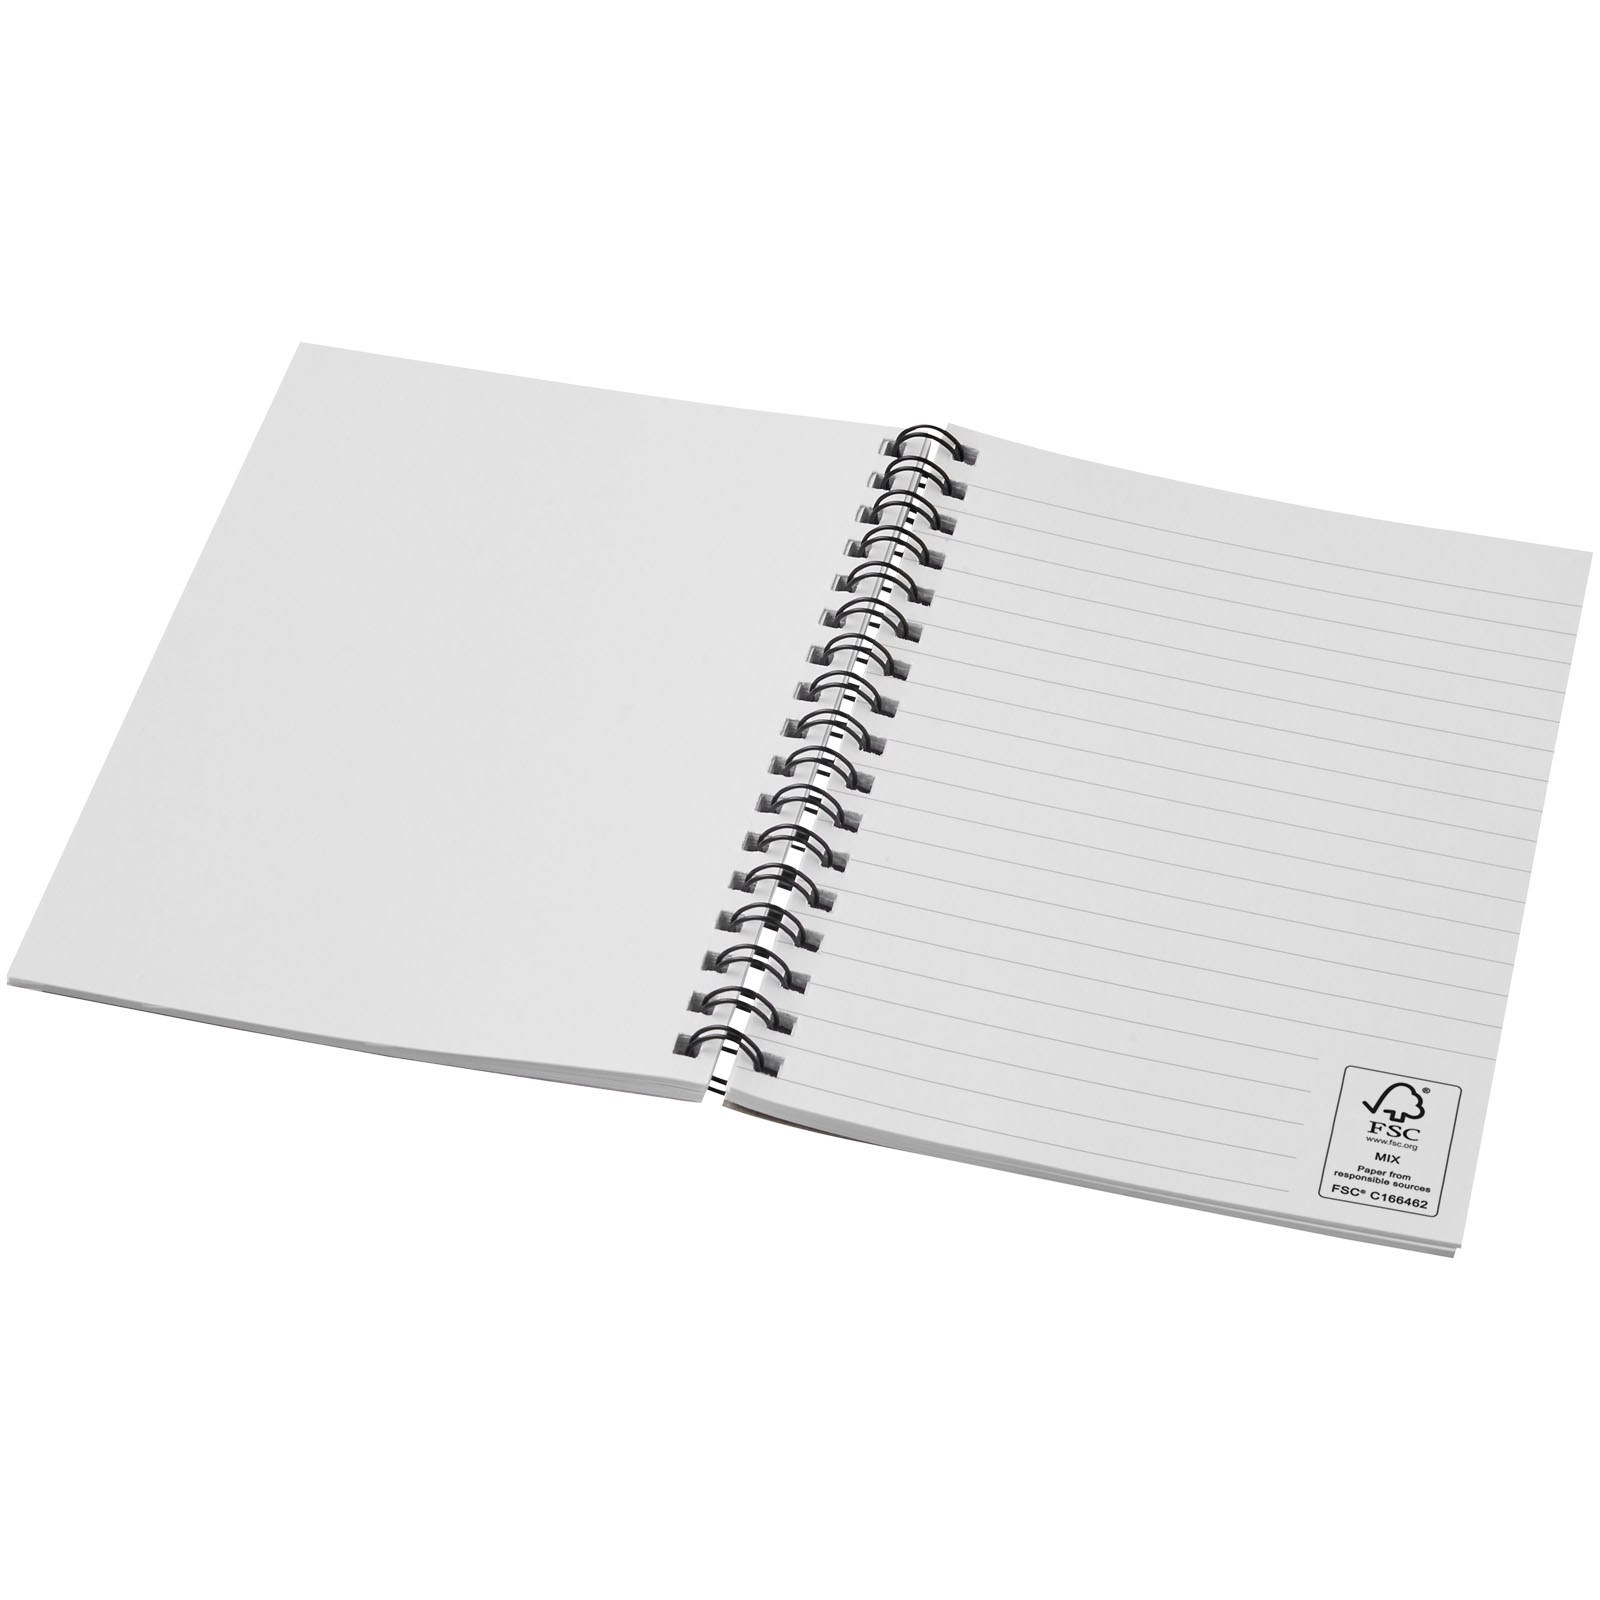 Advertising Soft cover notebooks - Desk-Mate® A6 colour spiral notebook - 2